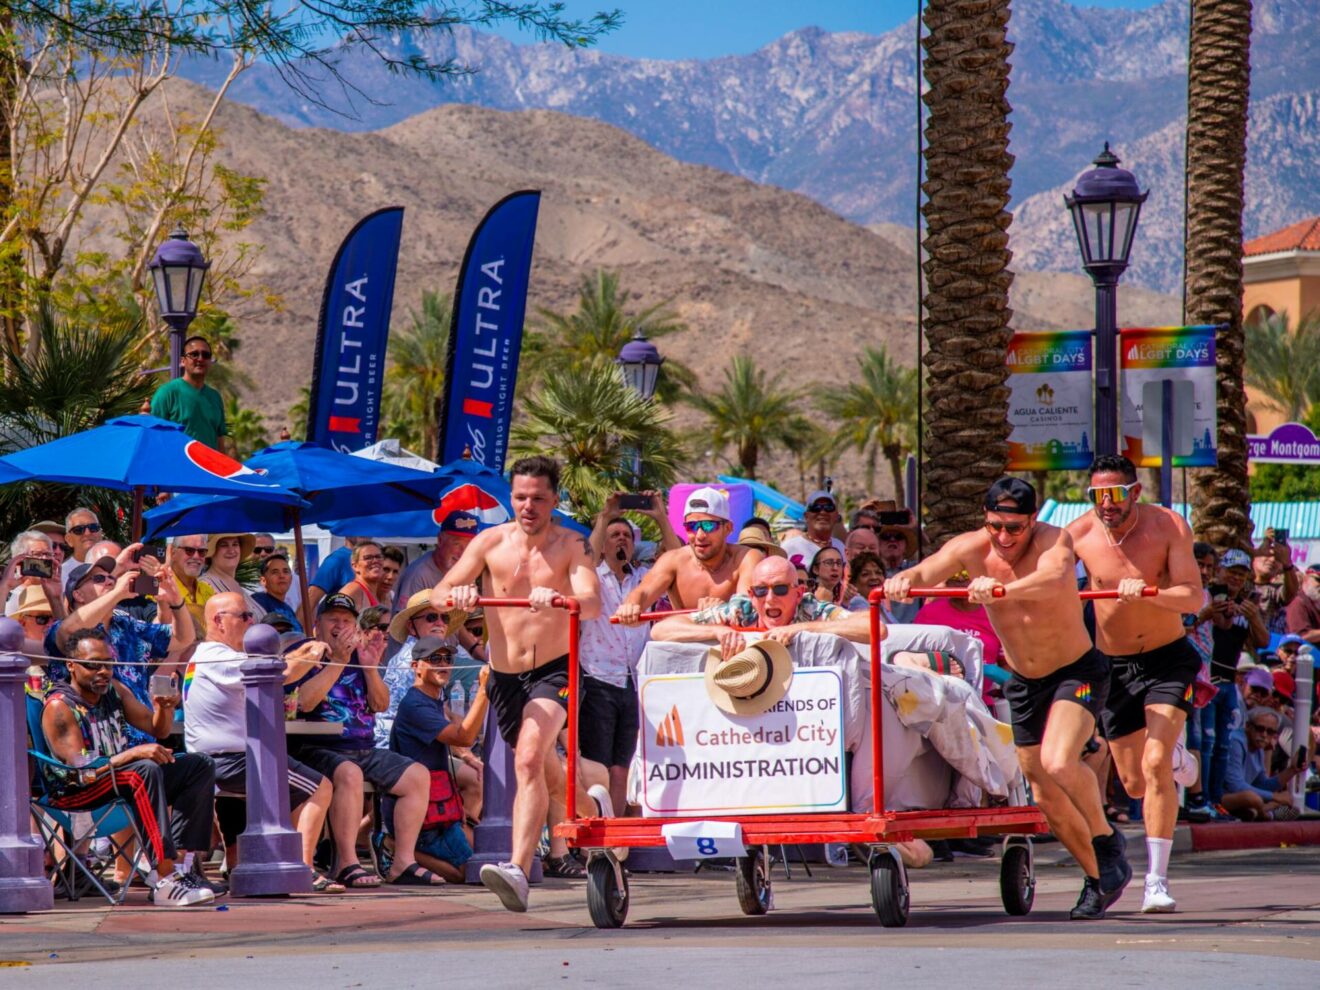 Cathedral City Proudly Announces Its 7th Annual LGBT Days Taking Place March 3-5, 2023